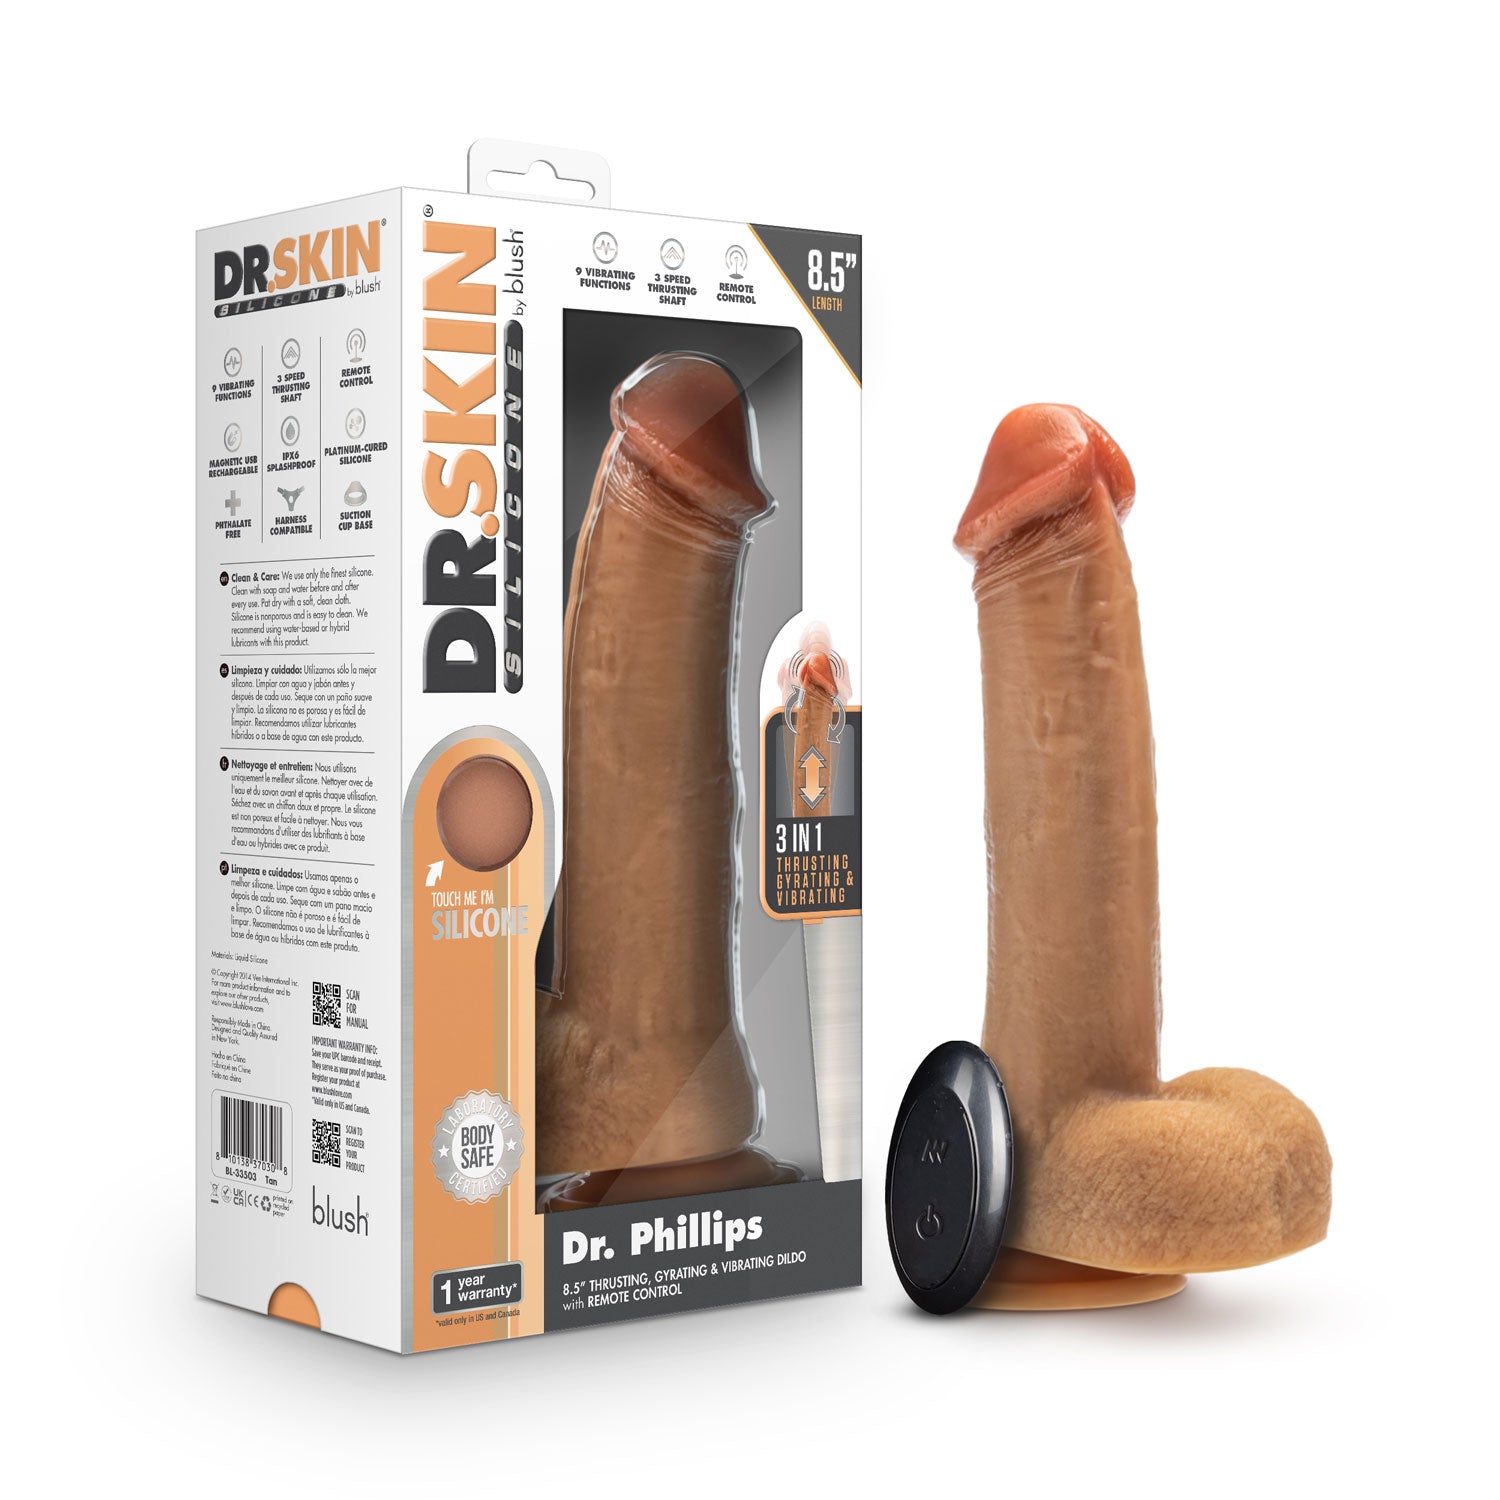 Dr. Skin Silicone - Dr. Phillips - 8.5 Inch  Thrusting Dildo - Tan-1